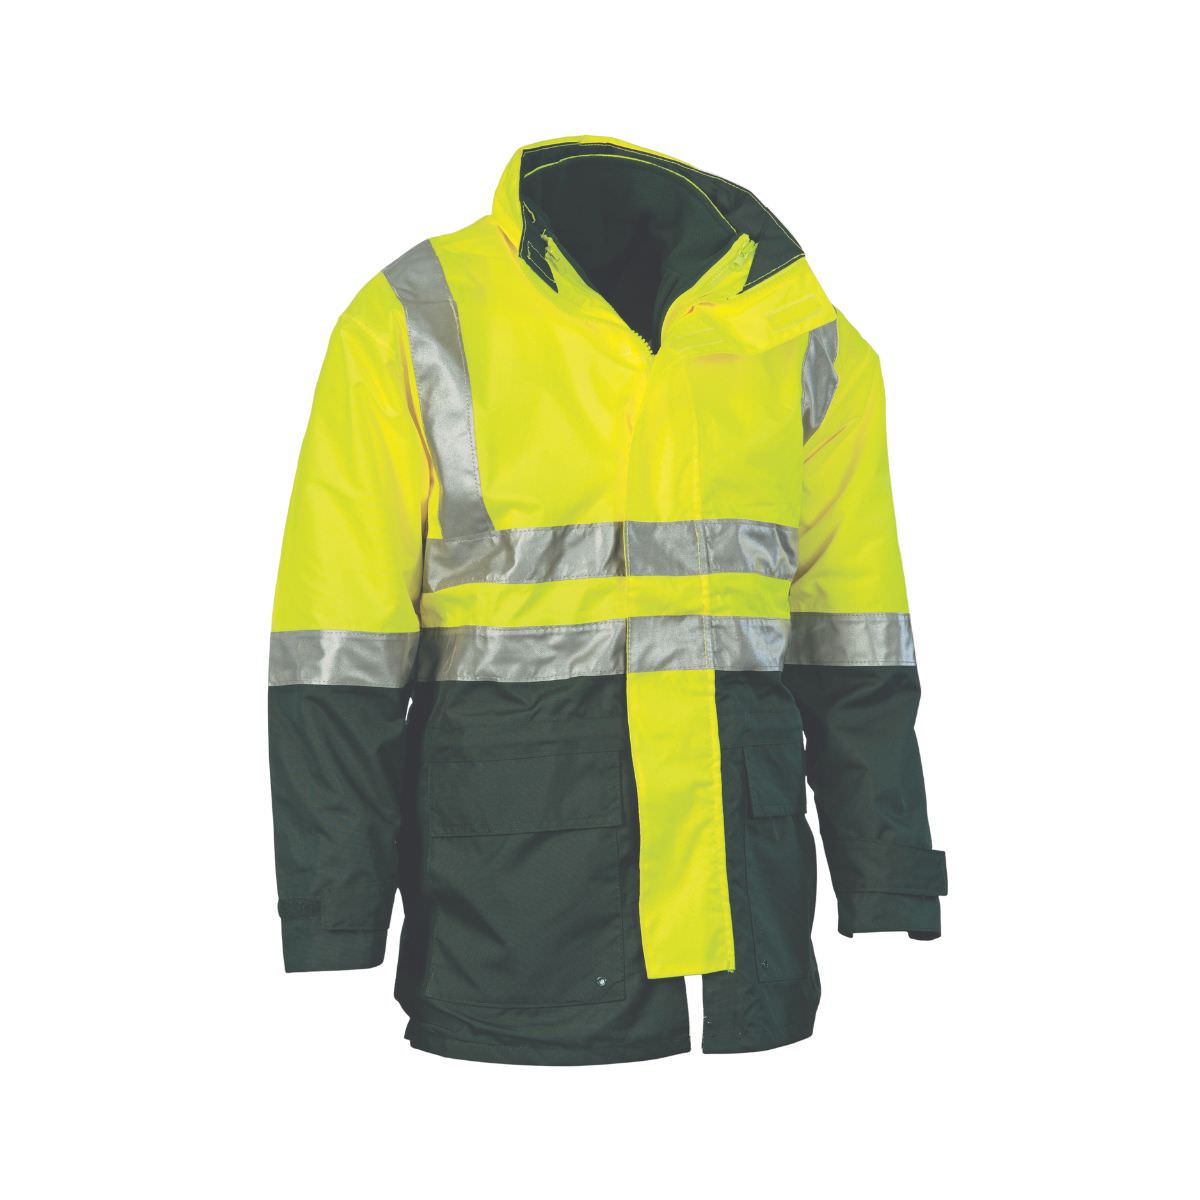 DNC 4 in 1 HiVis Two Tone Breathable Jacket with Vest and 3M Reflective Tape 3864